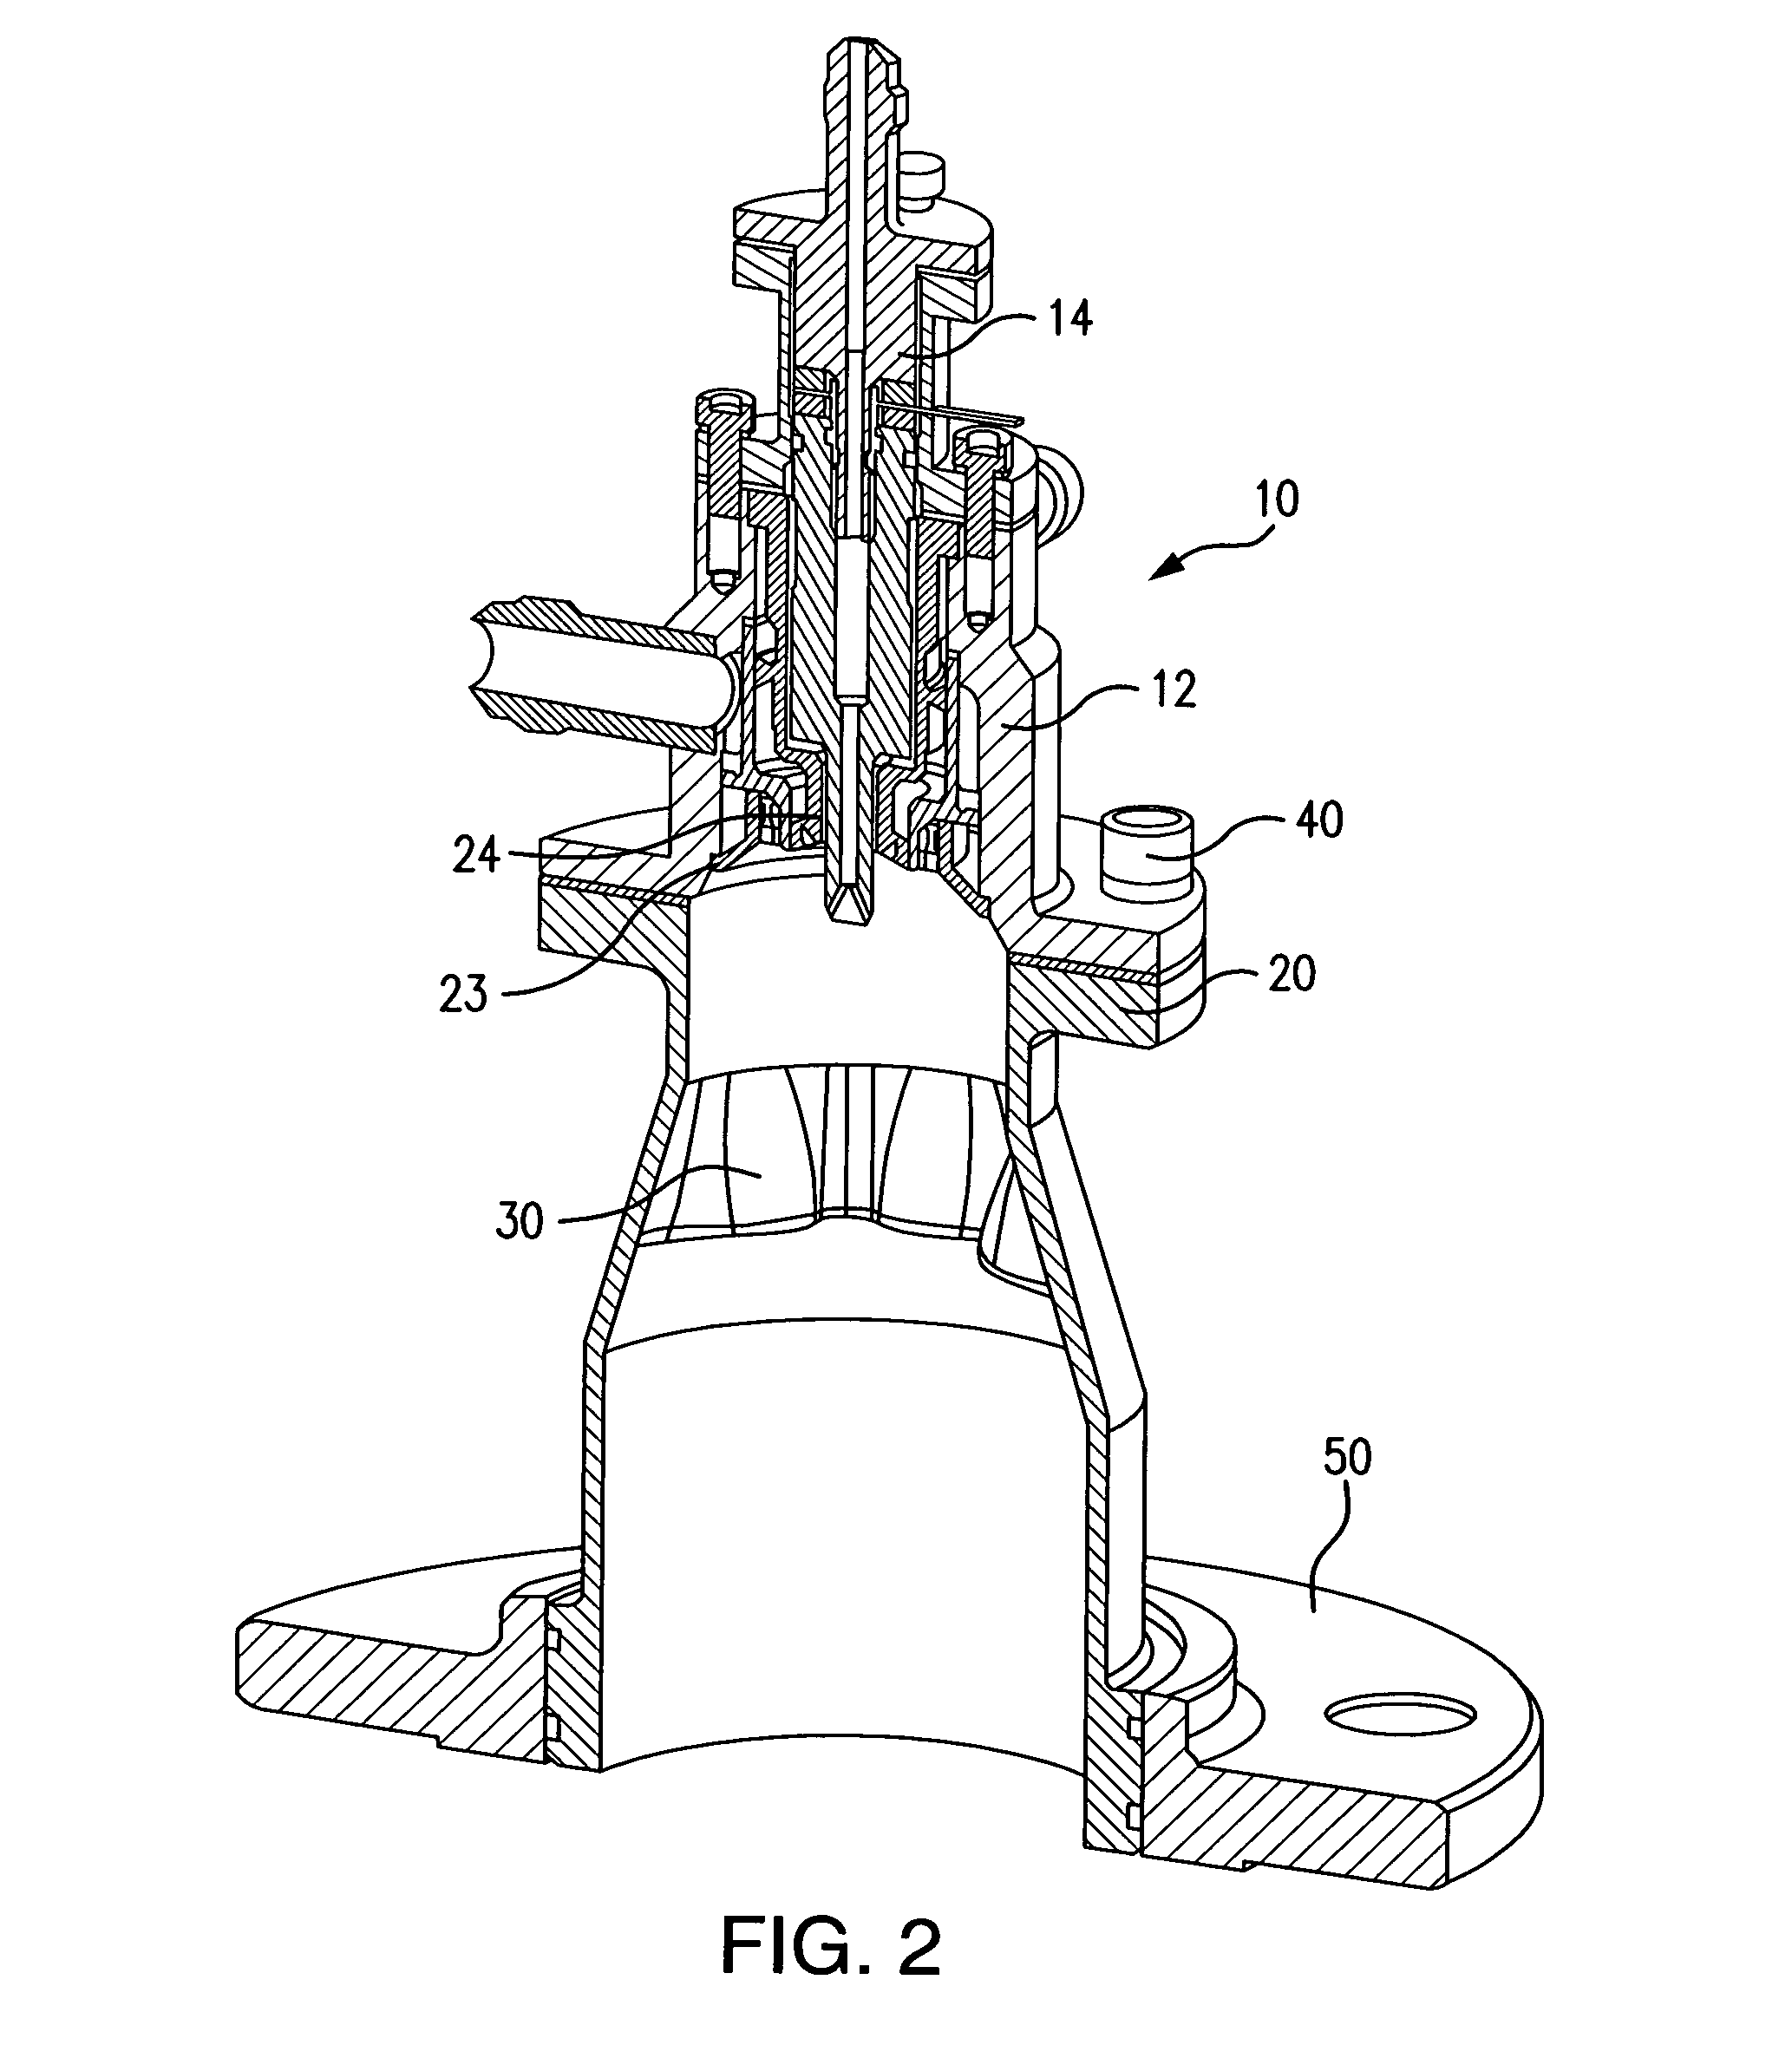 Fuel injection and mixing systems having piezoelectric elements and methods of using the same